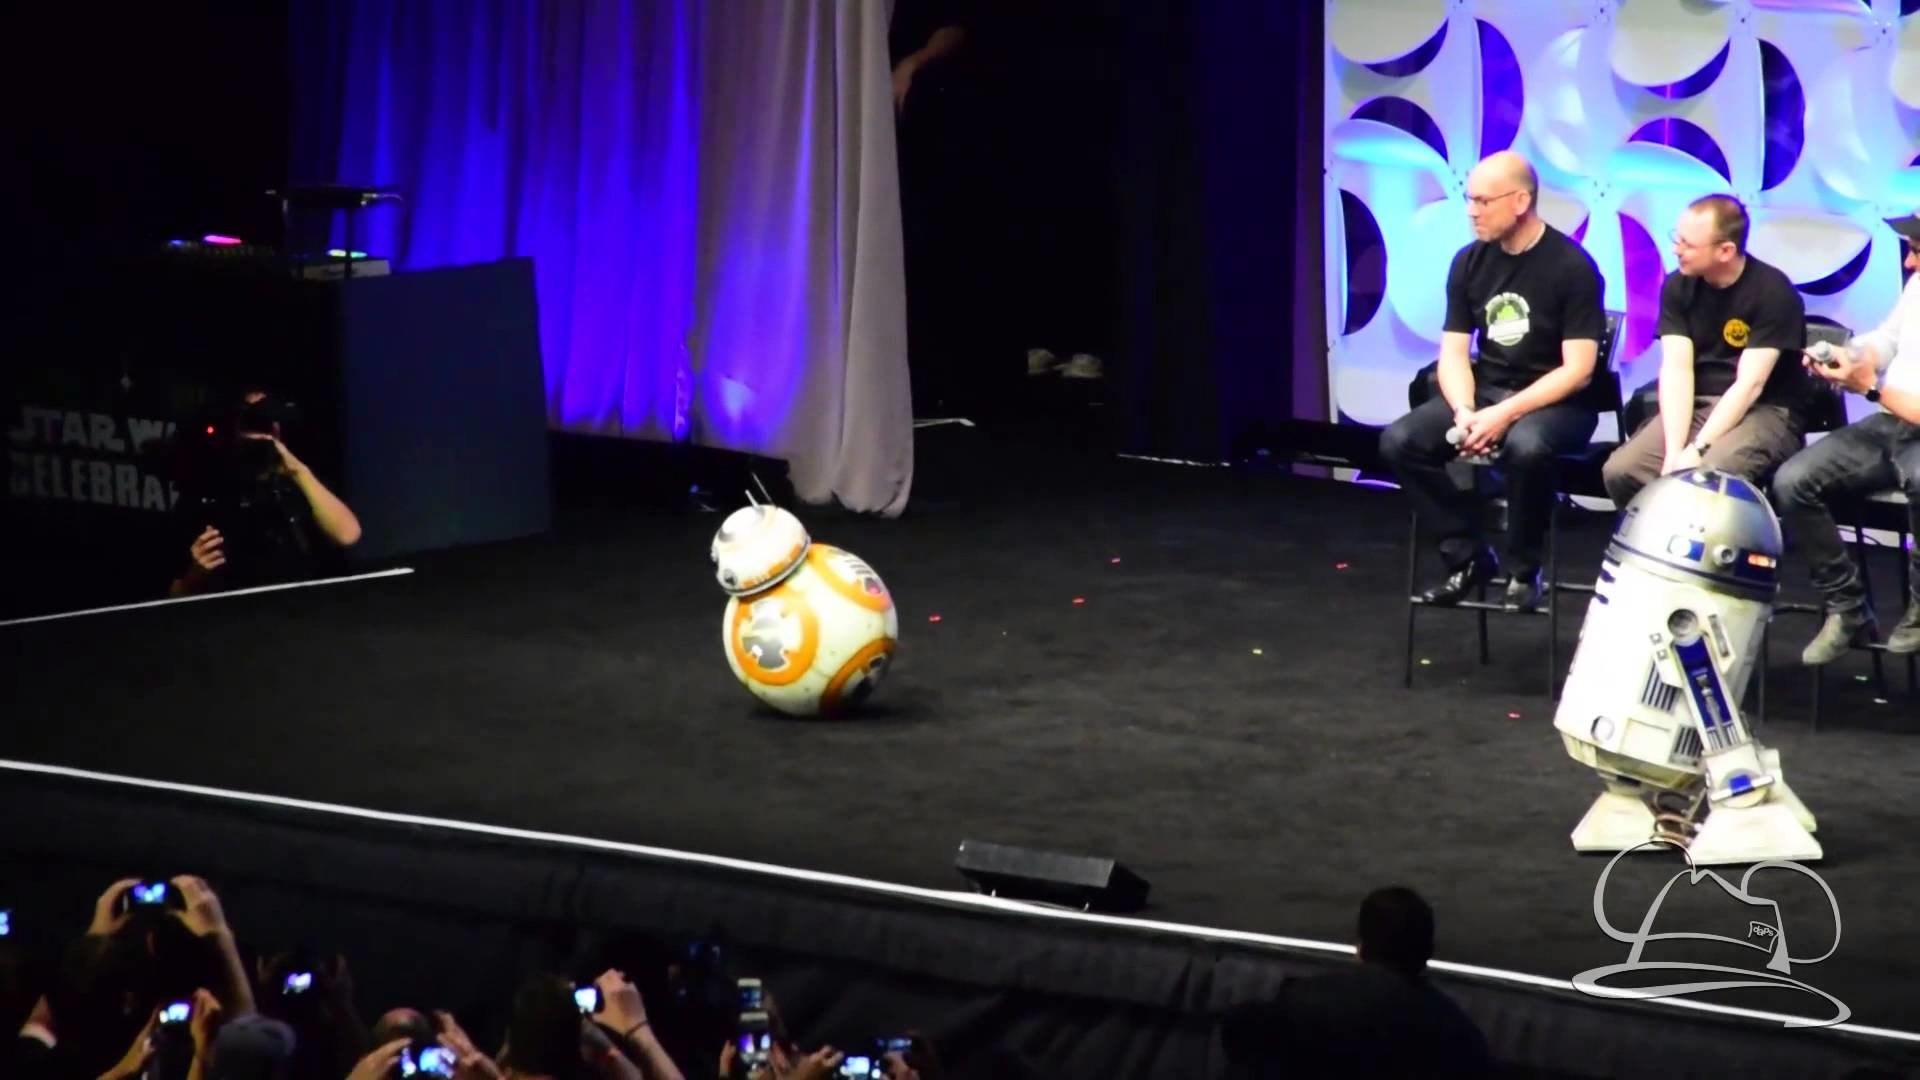 1920x1080 BB8 & R2-D2 at Star Wars: The Force Awakens Panel at Star Wars Celebration  Anaheim - YouTube